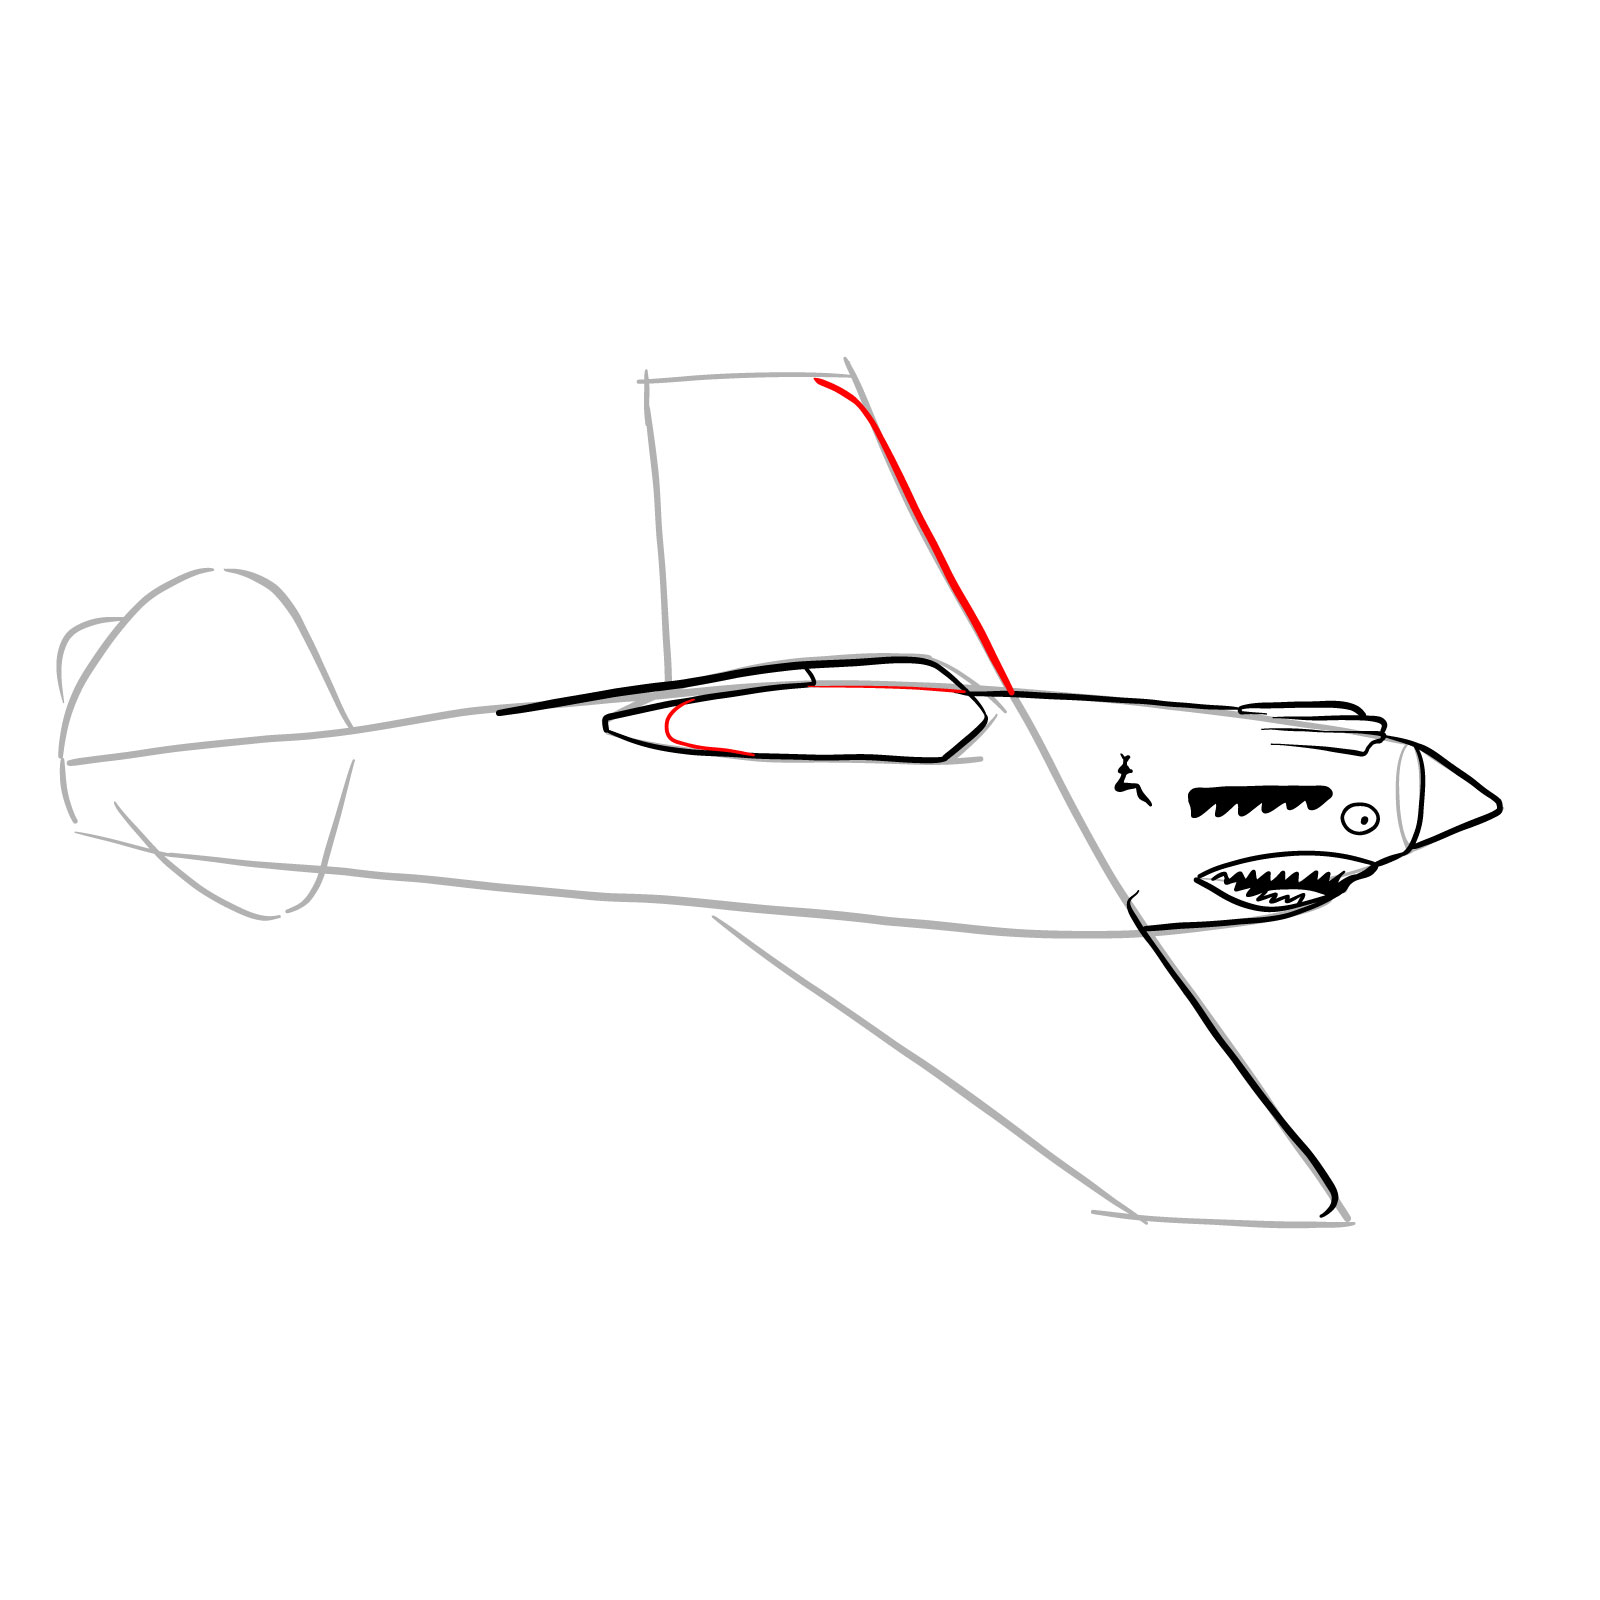 How to draw a P-40 Flying Tiger - step 14